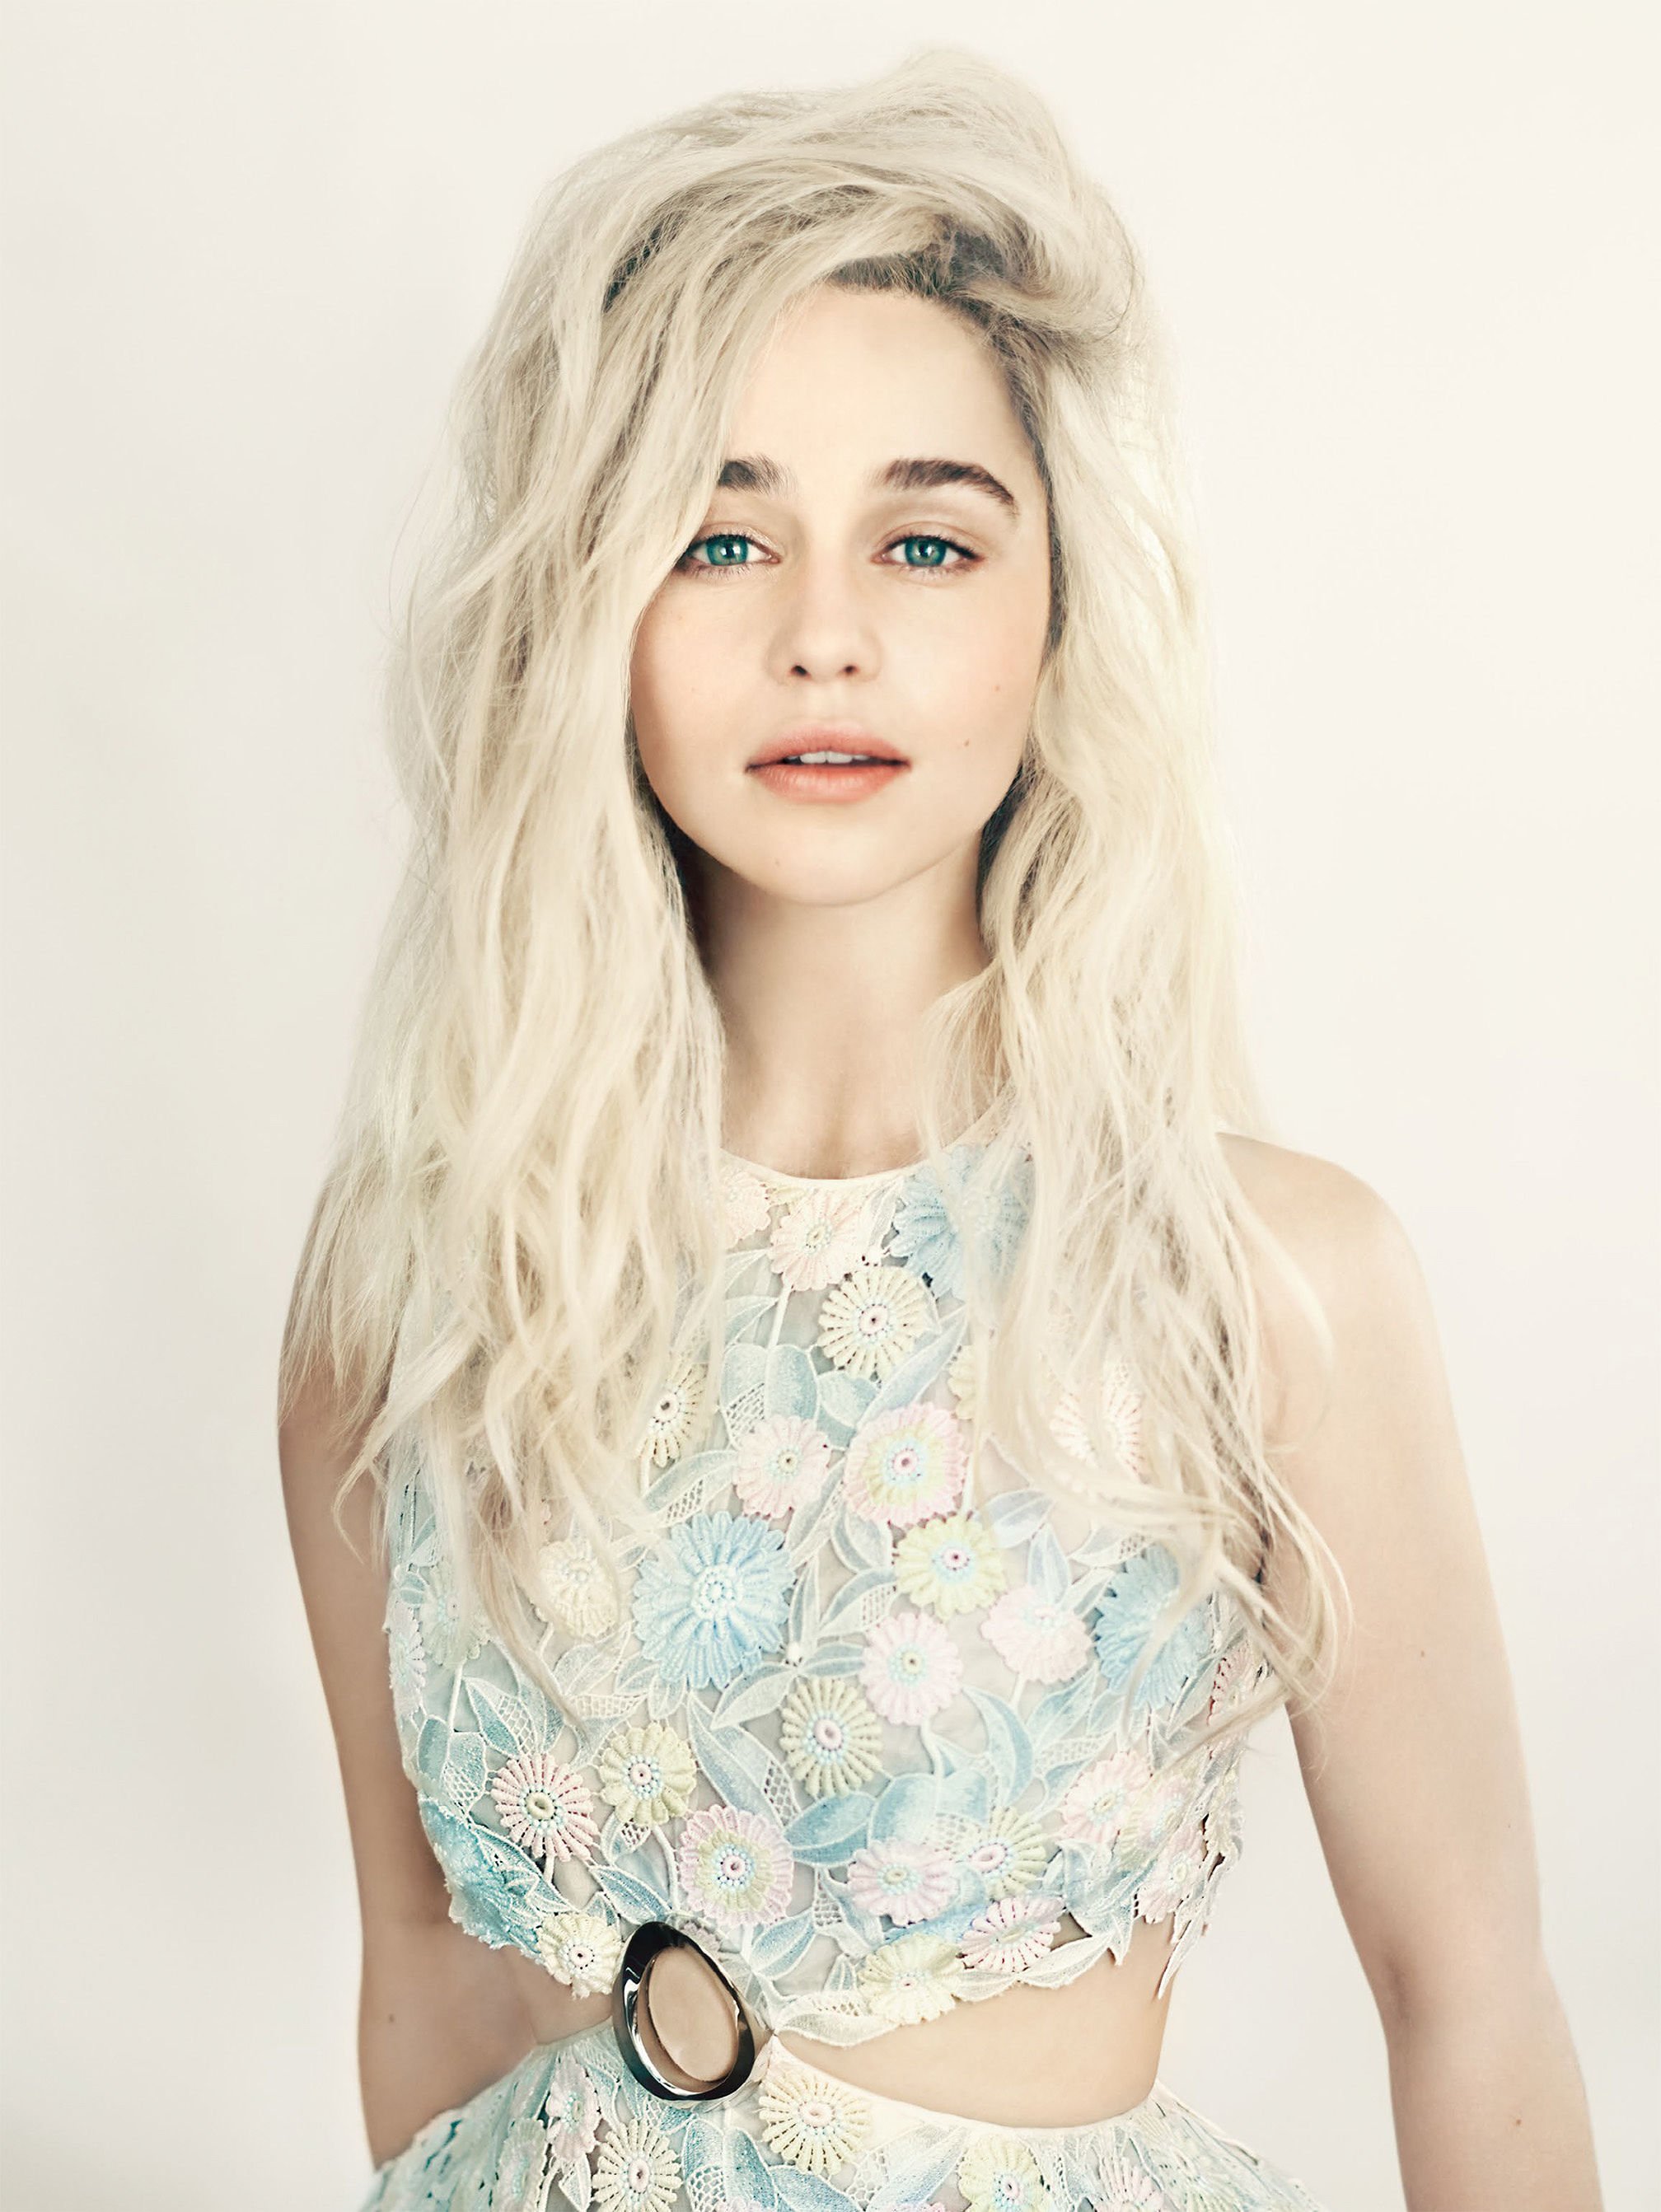 emilia-clarke-likes-sitting-on-the-floor-in-massive-frilly-dresses-pictures.jpg